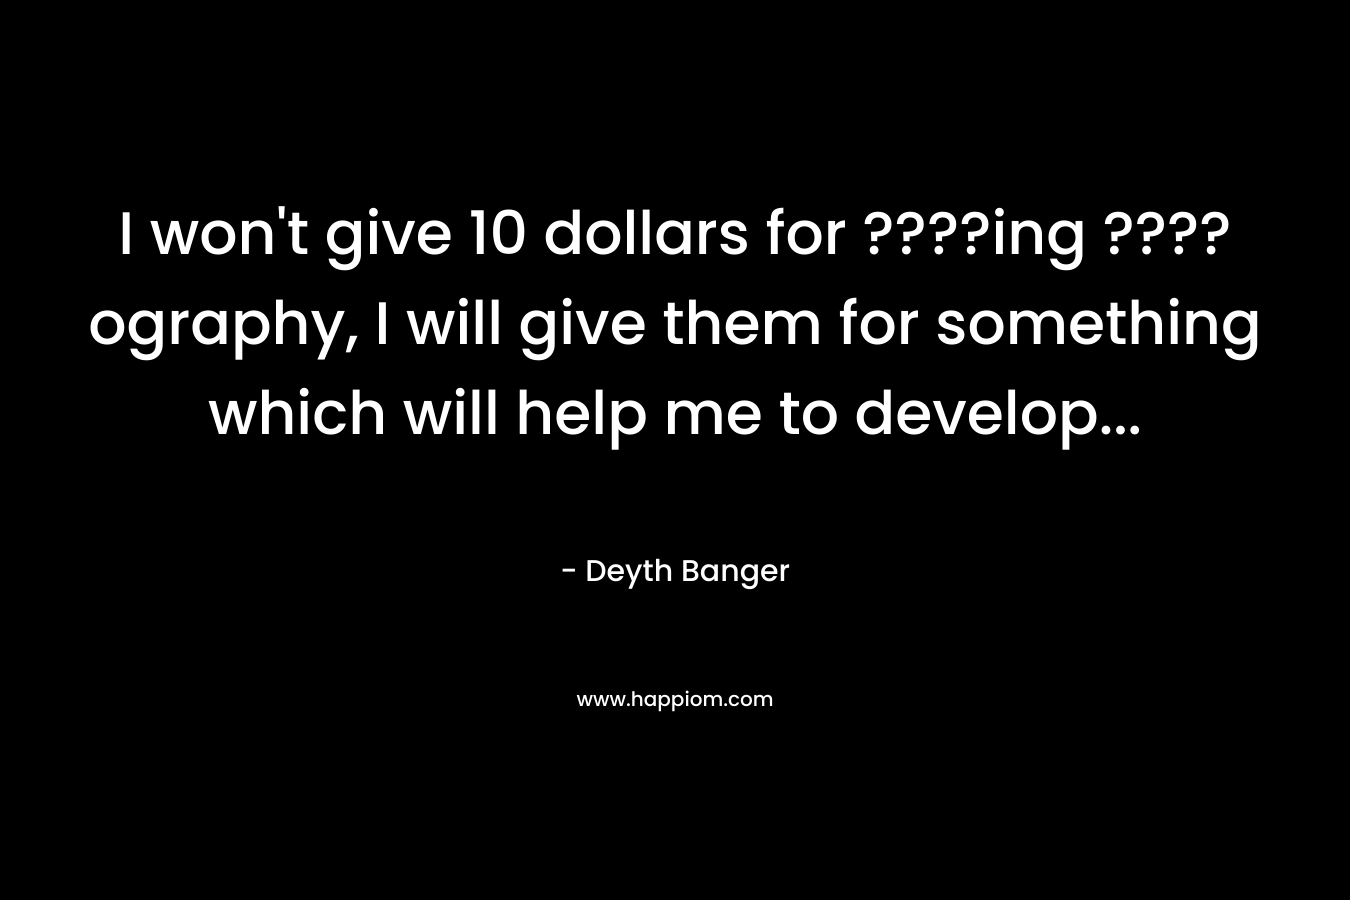 I won’t give 10 dollars for ????ing ????ography, I will give them for something which will help me to develop… – Deyth Banger